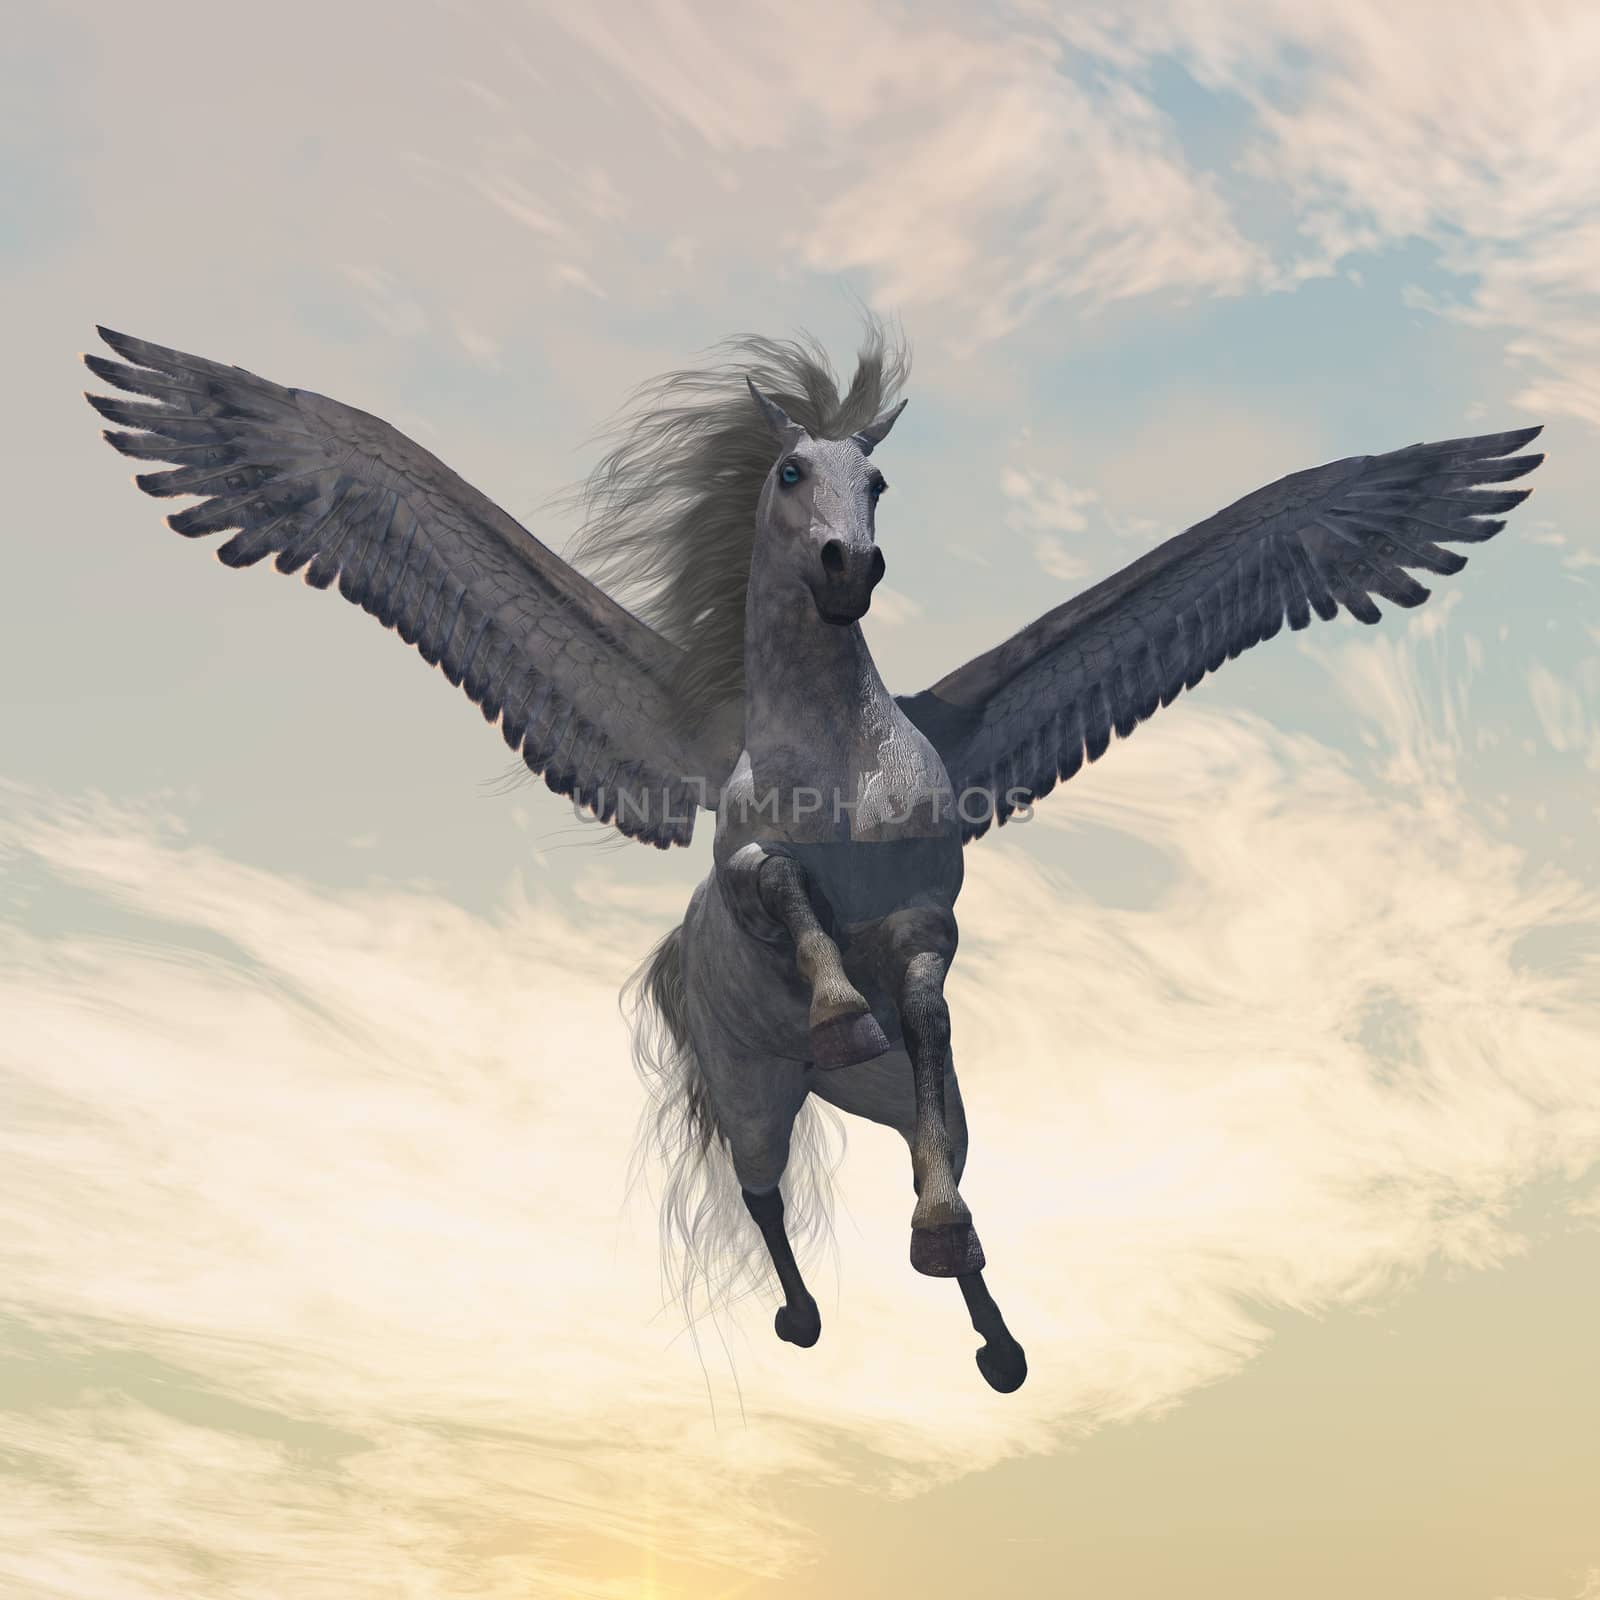 The fabled creature of myth and legend, the white Pegasus, flies with beautiful wings.